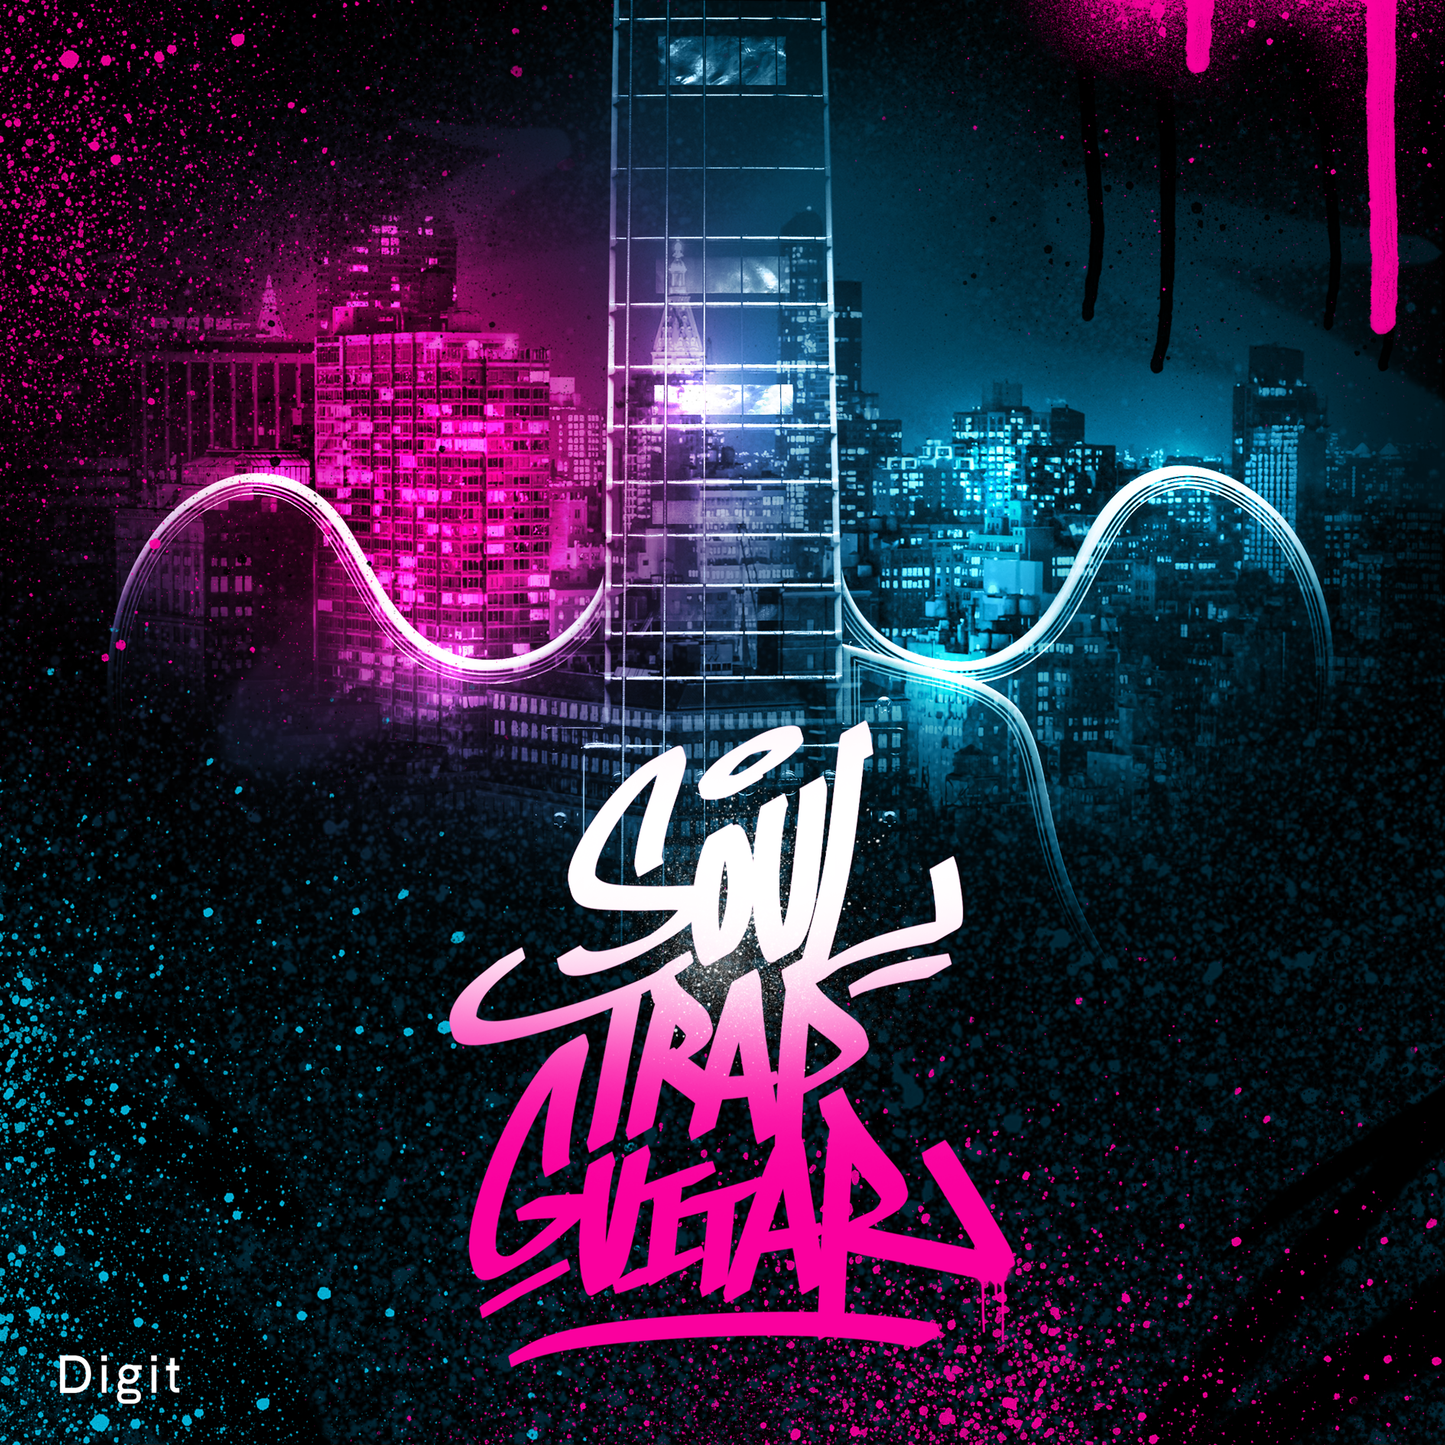 In the background there is a photograph of a city covered in neon pink and blue paint, in the foreground is the outline of an electric guitar.